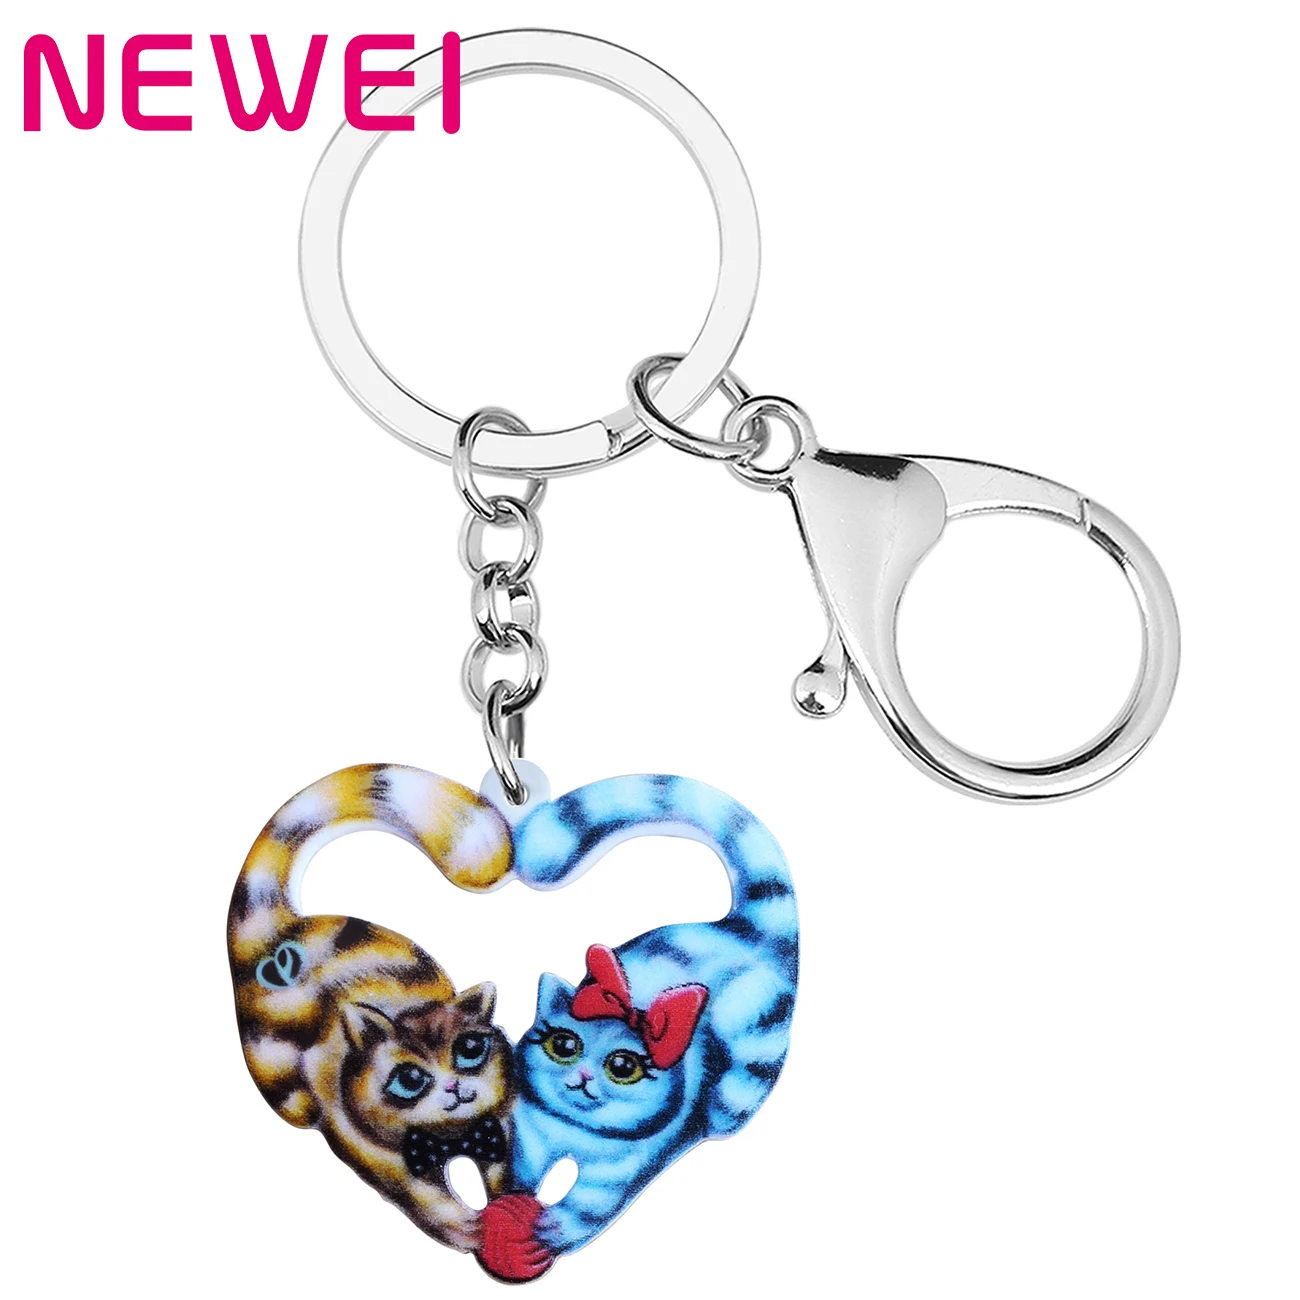 

Valentines Day Acrylic Heart Cat Kitten Keychains Car Purse Key Ring Gifts Fashion Jewelry for Women Girls Bag Charm Accessories, Multicolor,black